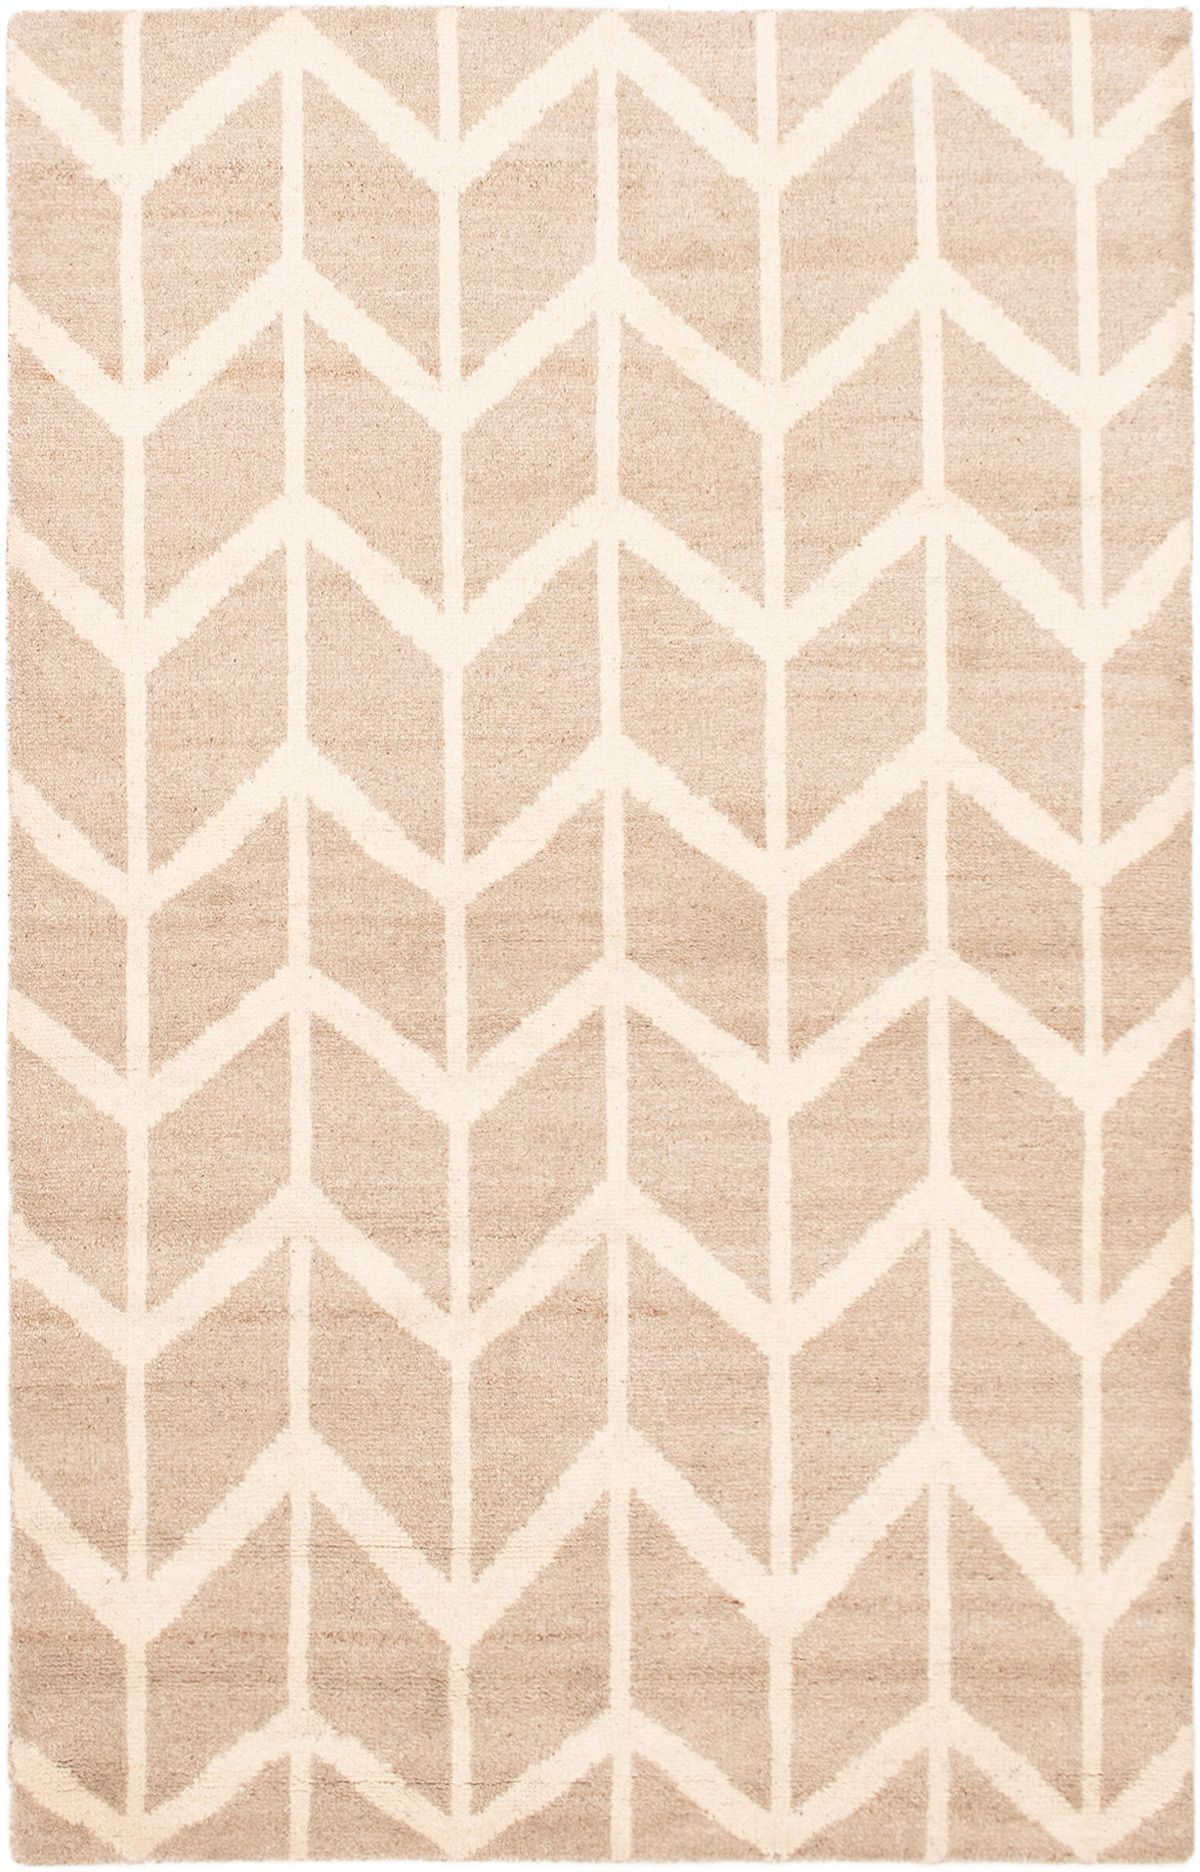 Hand-knotted Tangier Cream Wool Rug 5'1" x 8'2" Size: 5'1" x 8'2"  